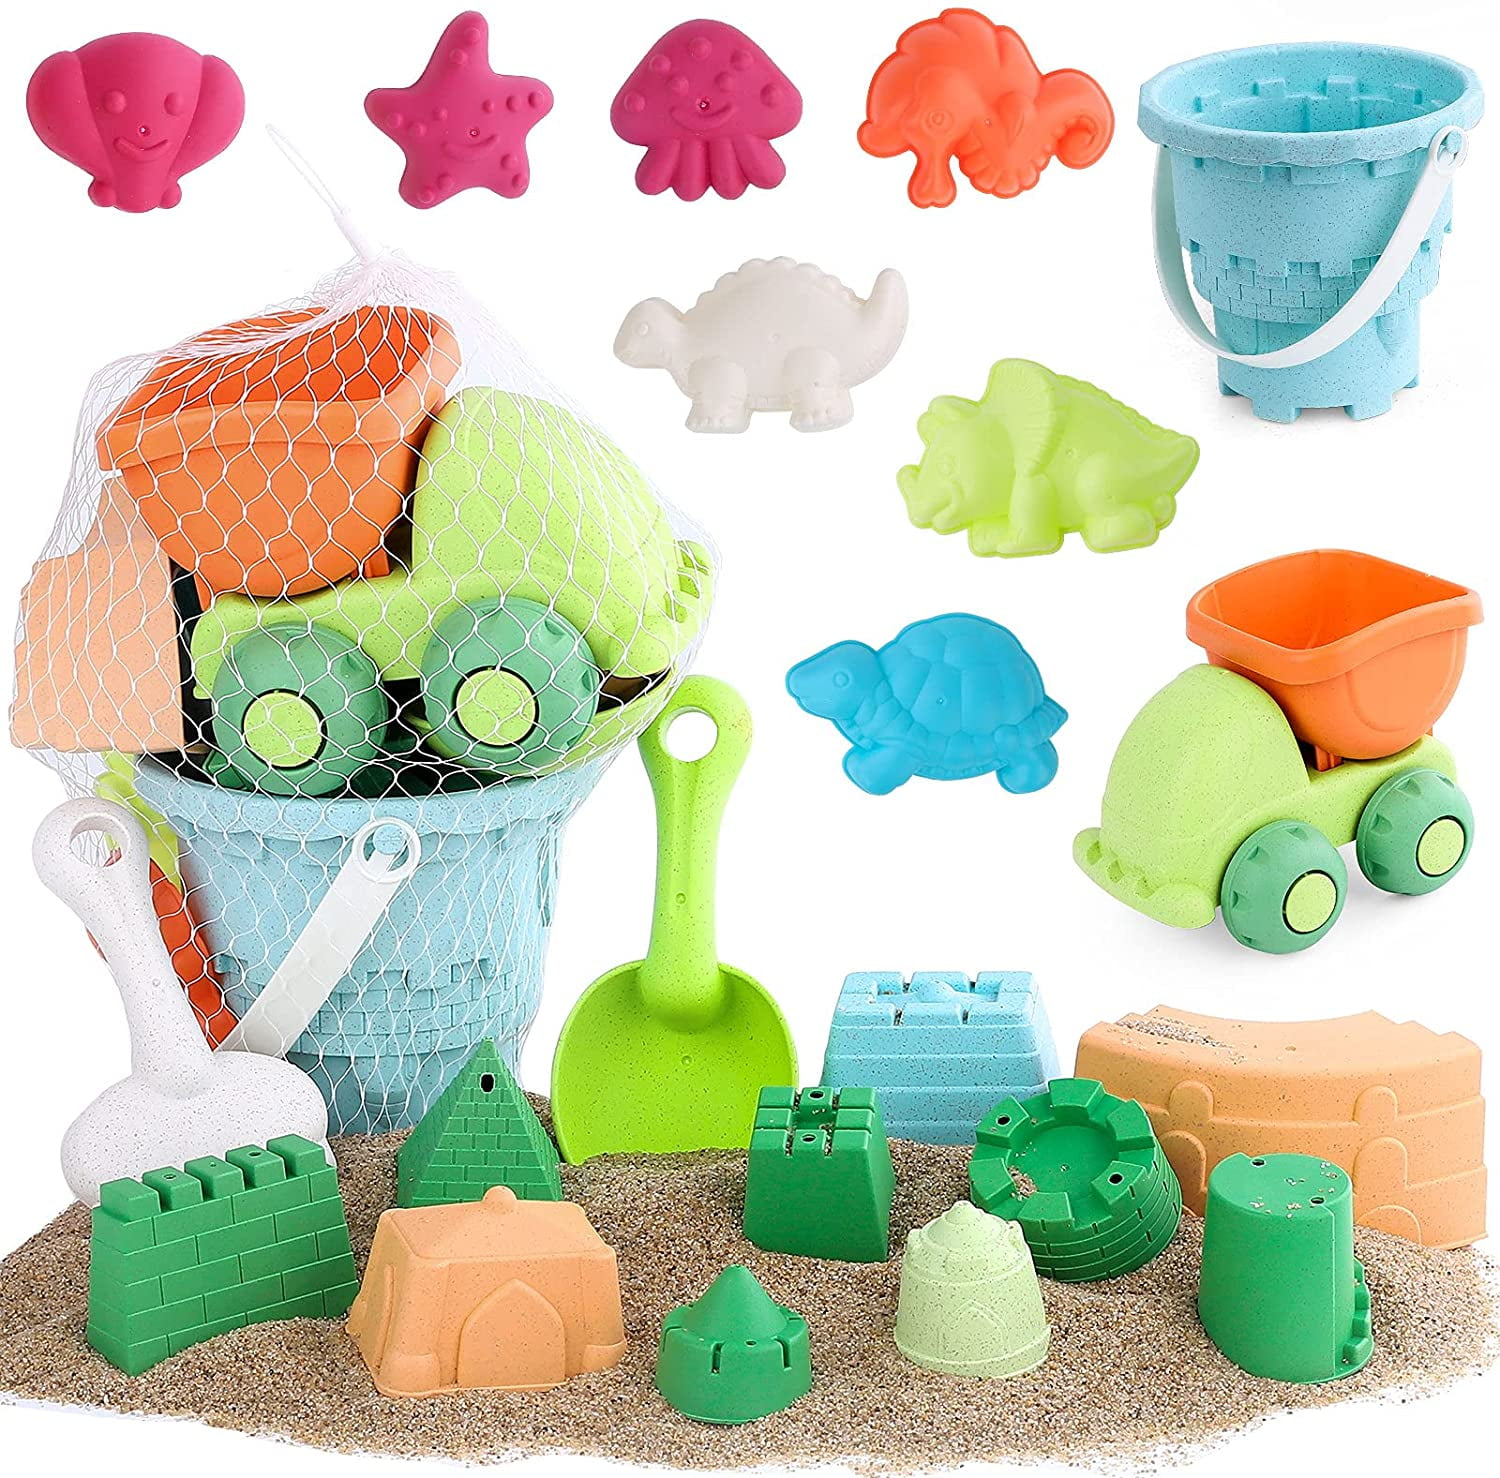 Dreamon Beach Sand Toys for Kids Toddlers Sandbox Toys with Bucket Shovel Mesh Beach Bag Sand and Water Play 13PCS 